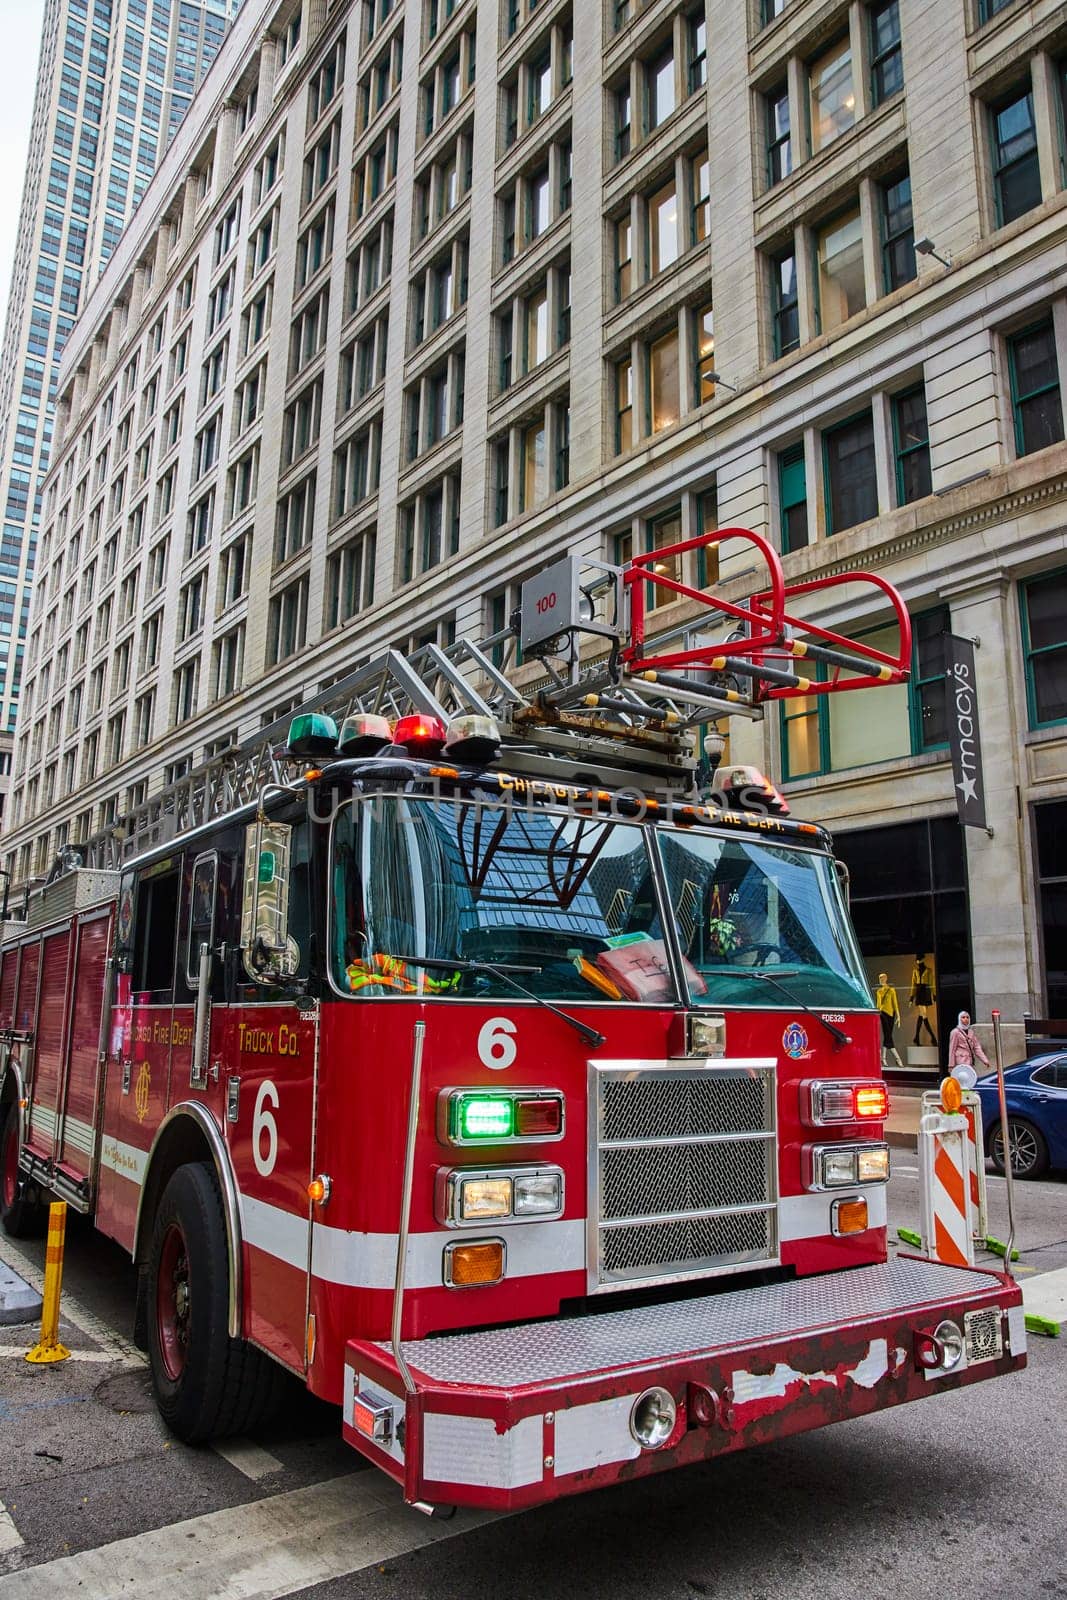 Fire truck, engine number 6 in downtown Chicago, Illinois, USA by njproductions